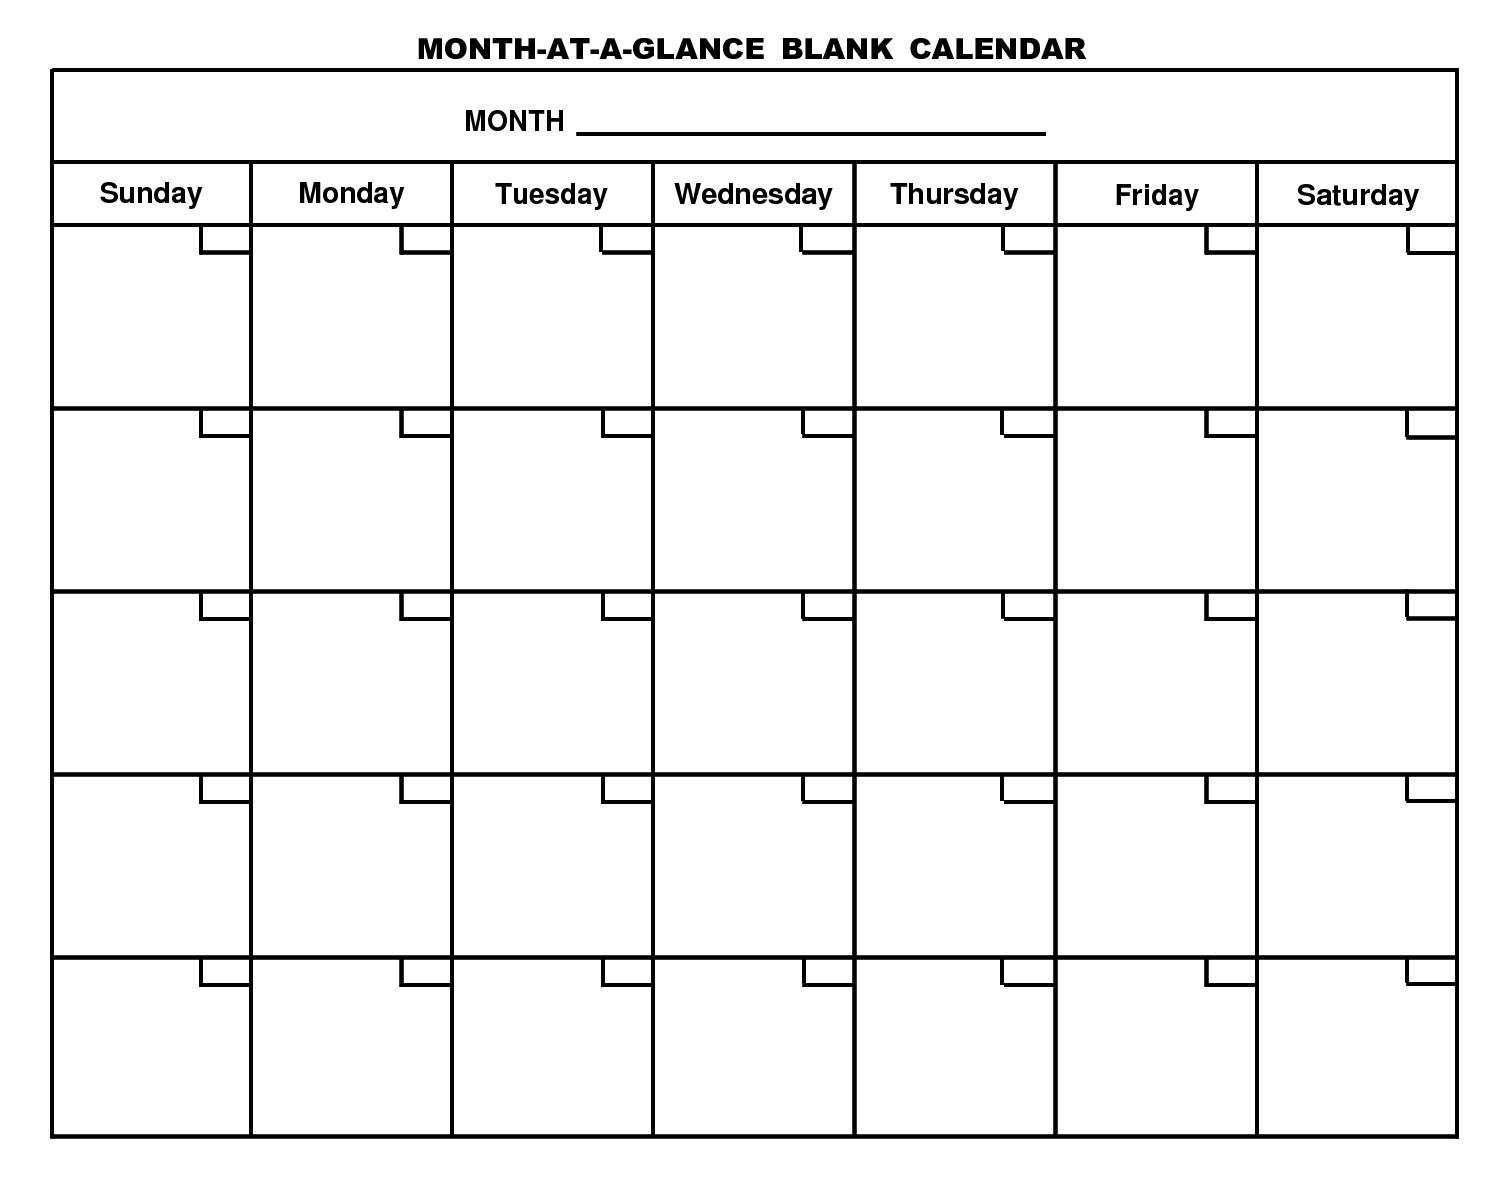 Month At A Glance Blank Calendar Template - Dalep.midnightpig.co Inside Month At A Glance Blank Calendar Template